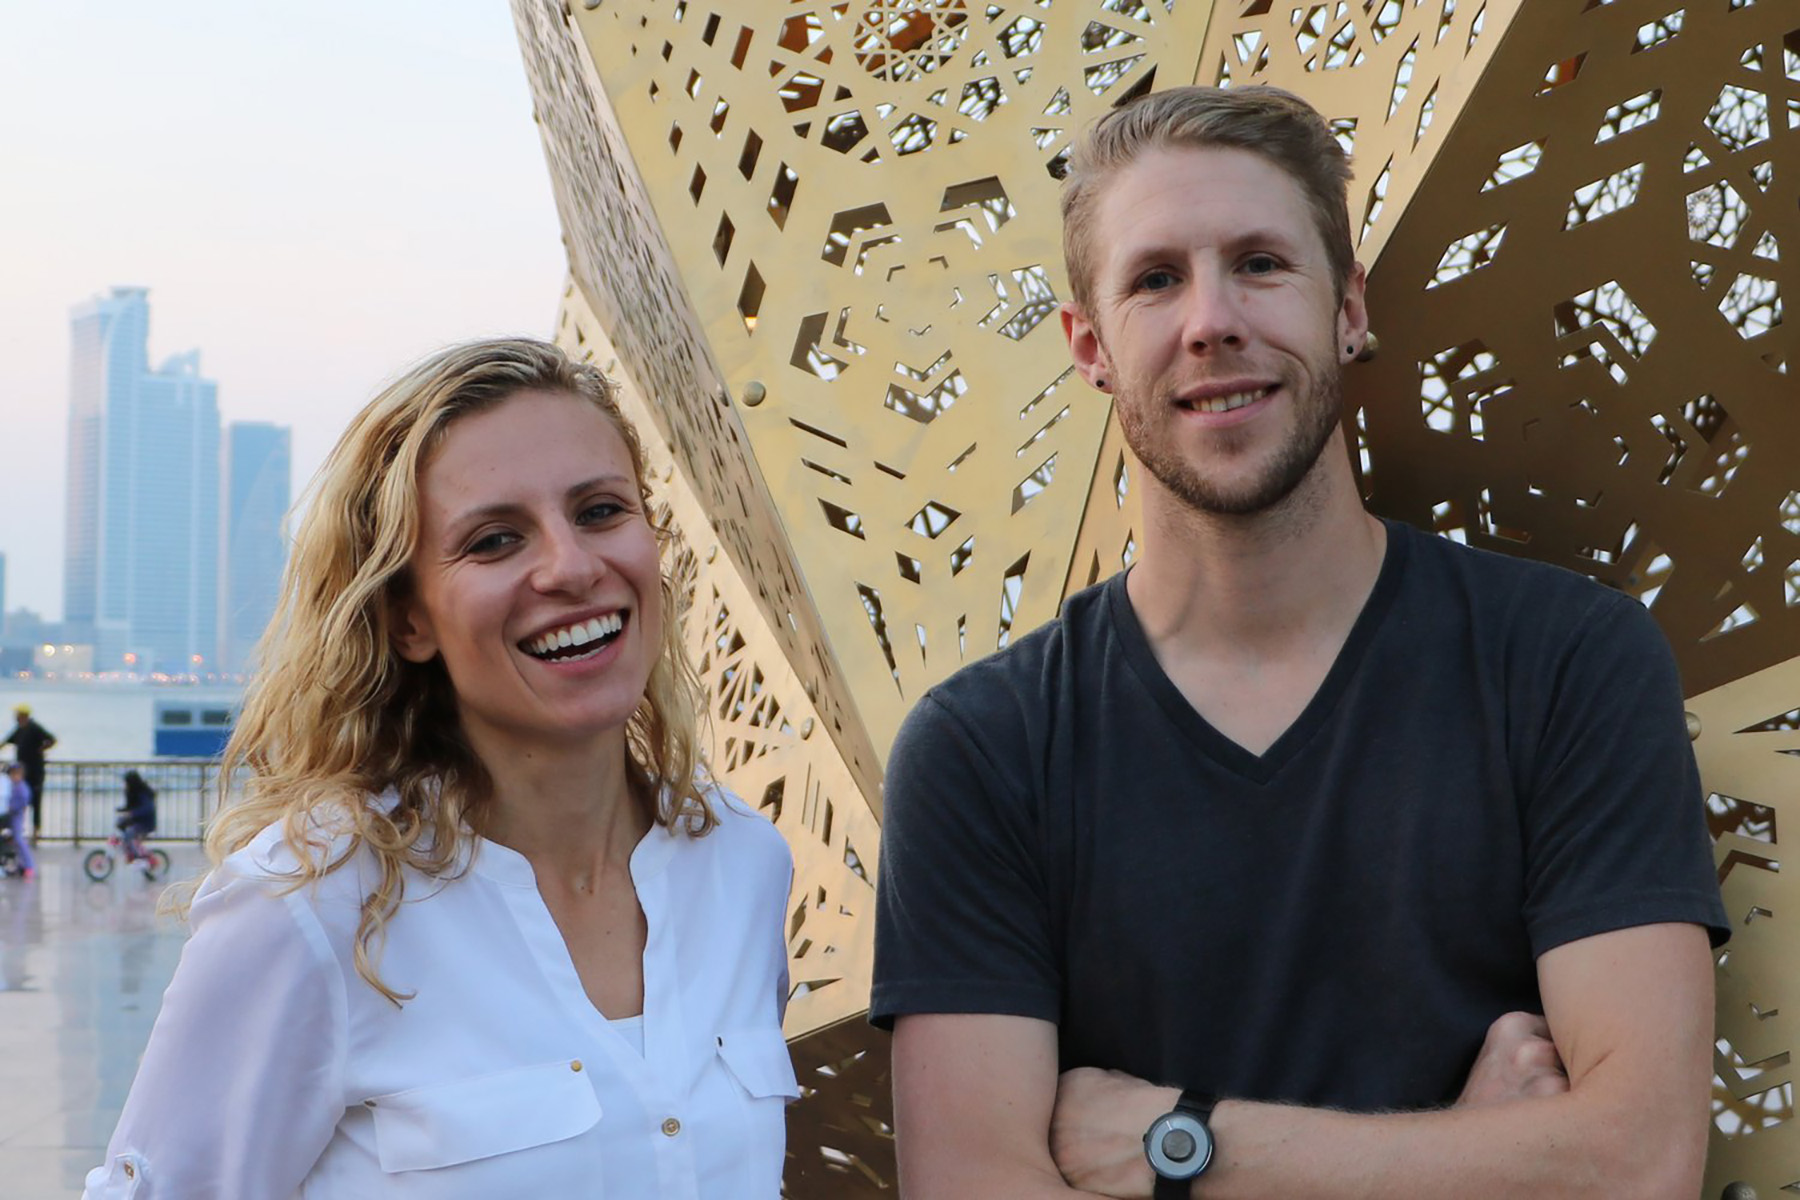 Two blond artists, Yelena Filipchuk and Serge Beaulieu are standing in front of a lacy, brass sculpture they created.